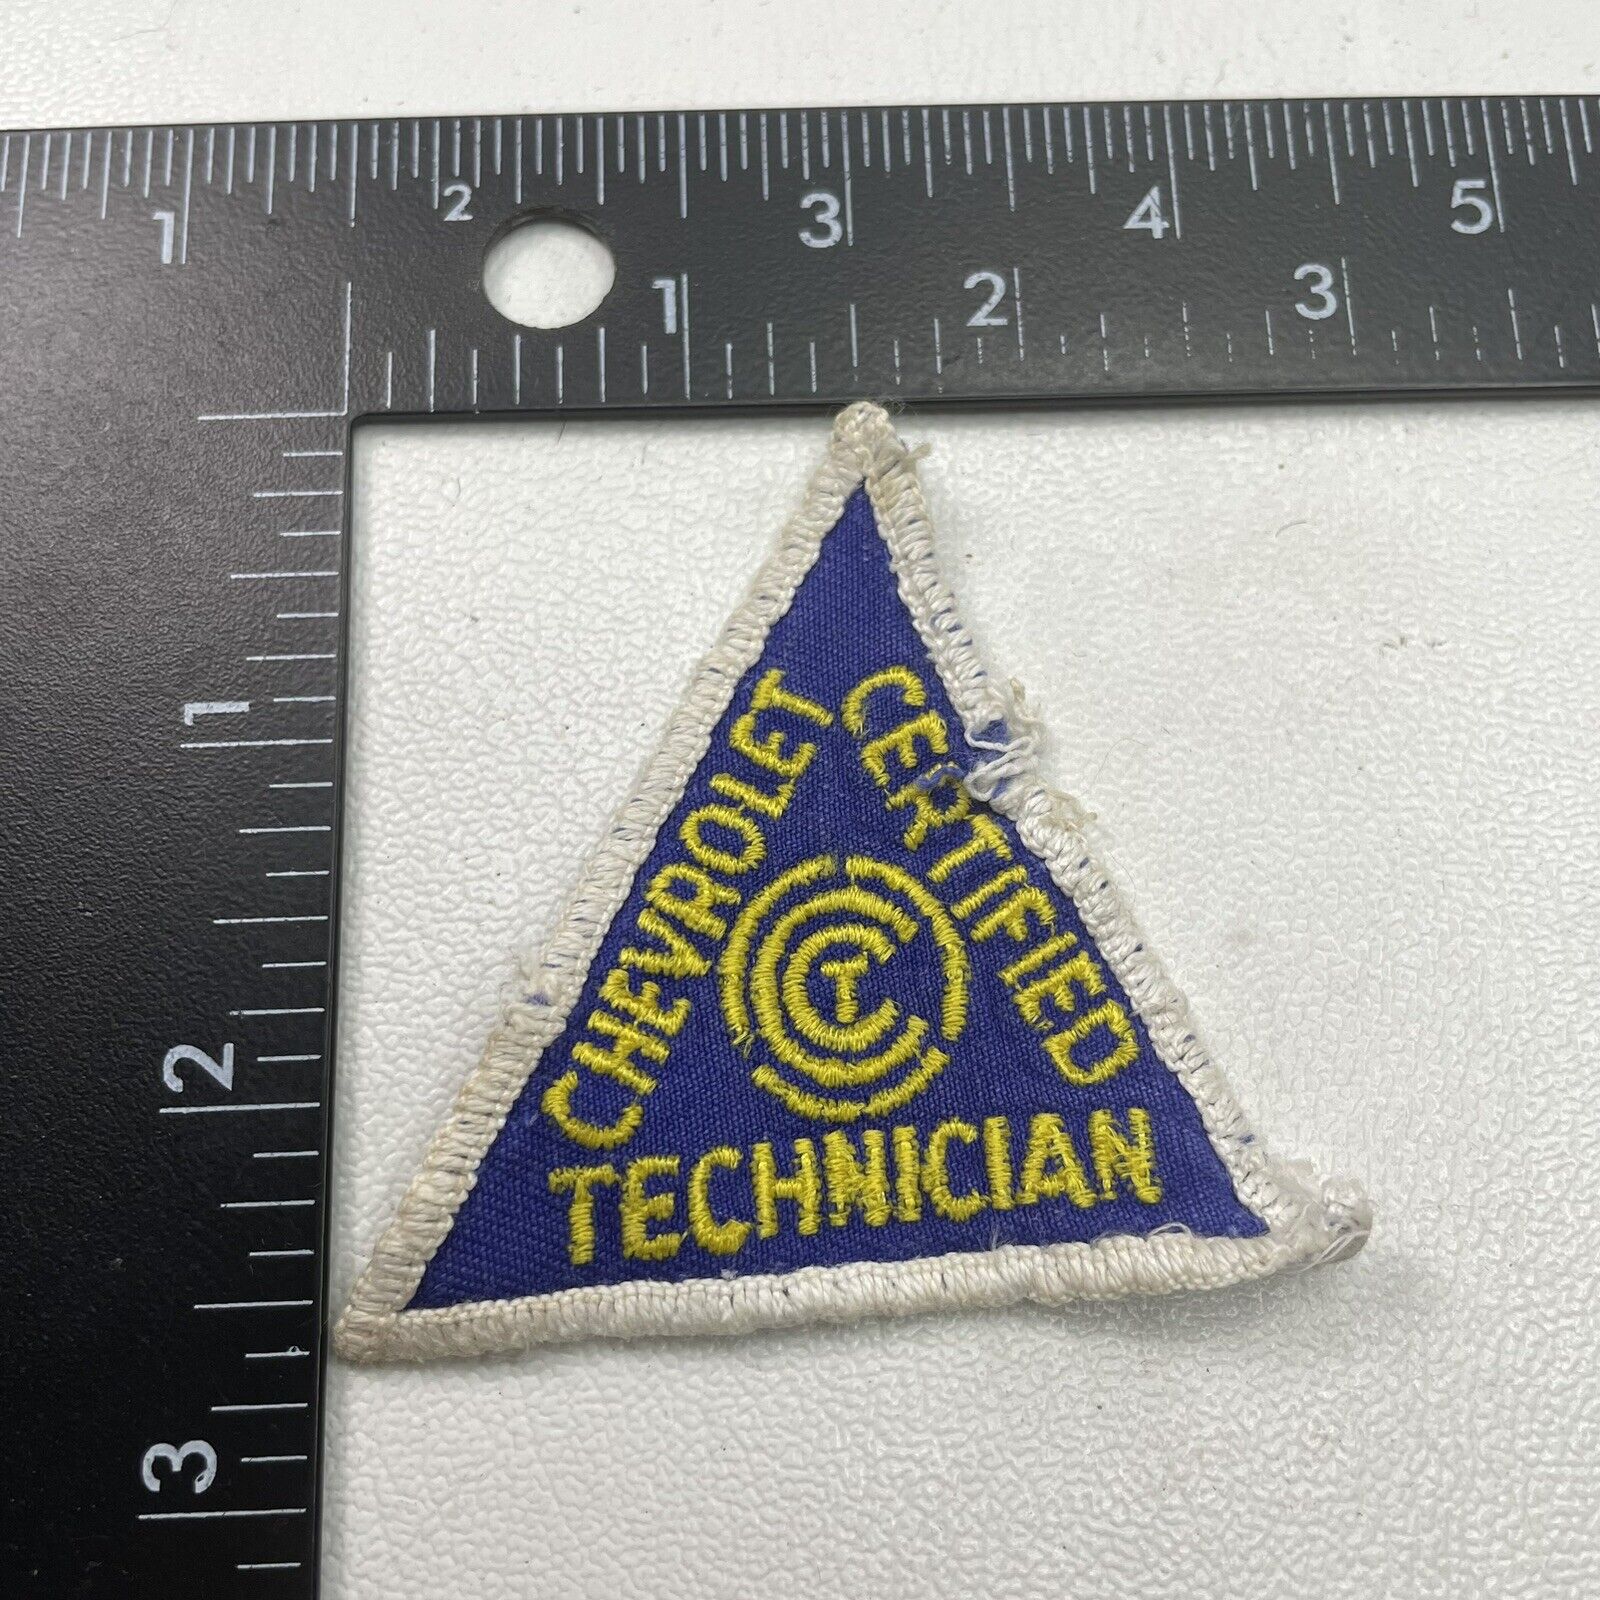 Vintage CHEVROLET CERTIFIED TECHNICIAN Car Auto Patch HTF OLD STYLE 23D1